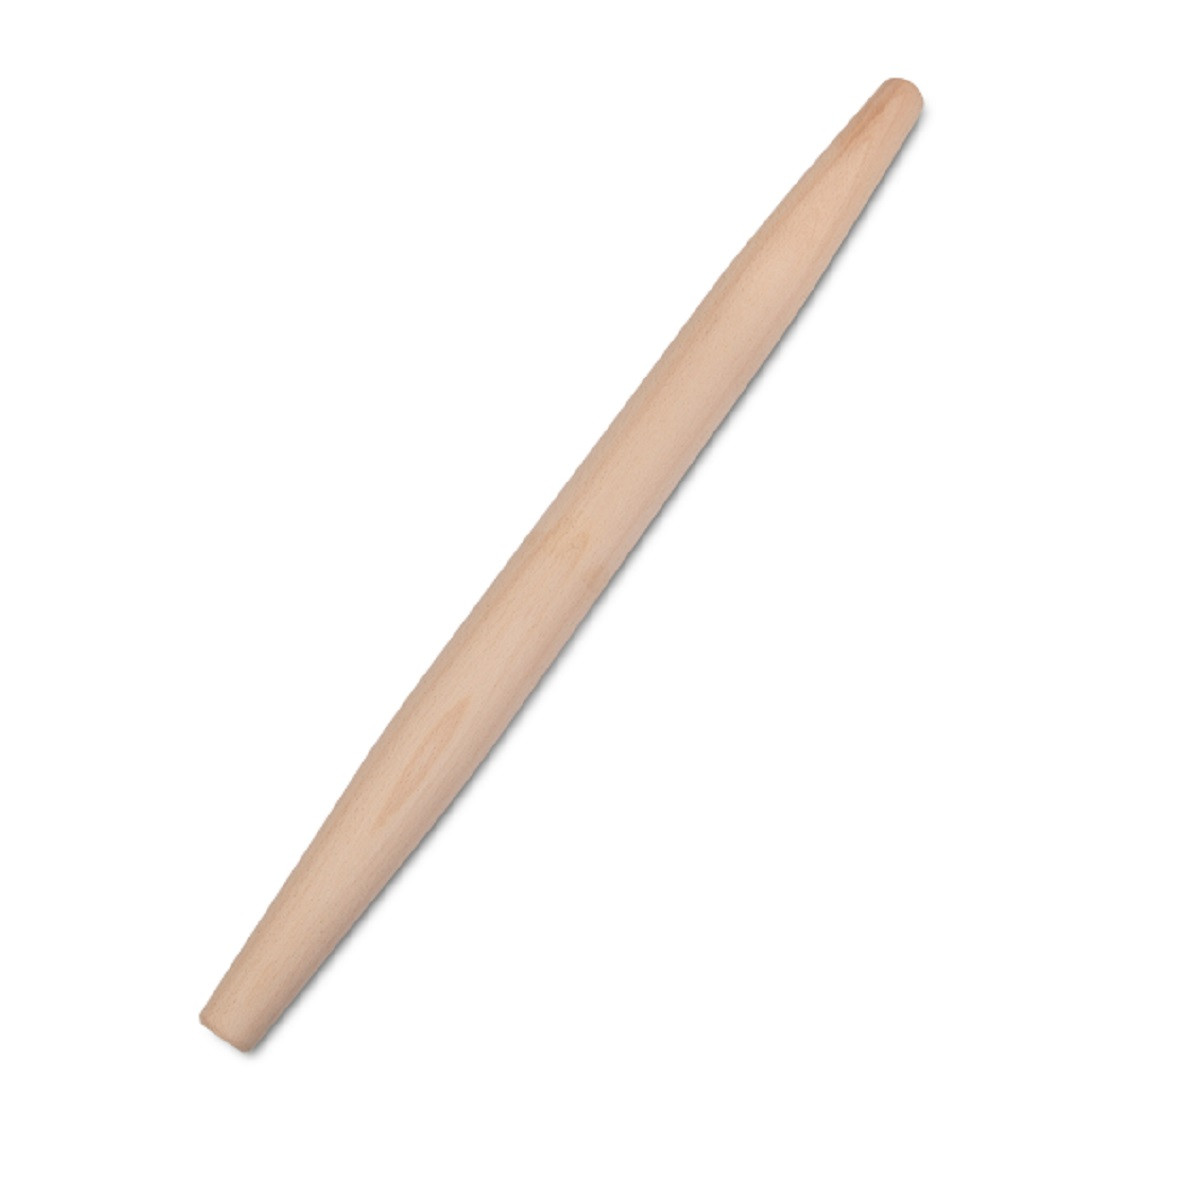 Städter Wooden rolling pin 45.5cm